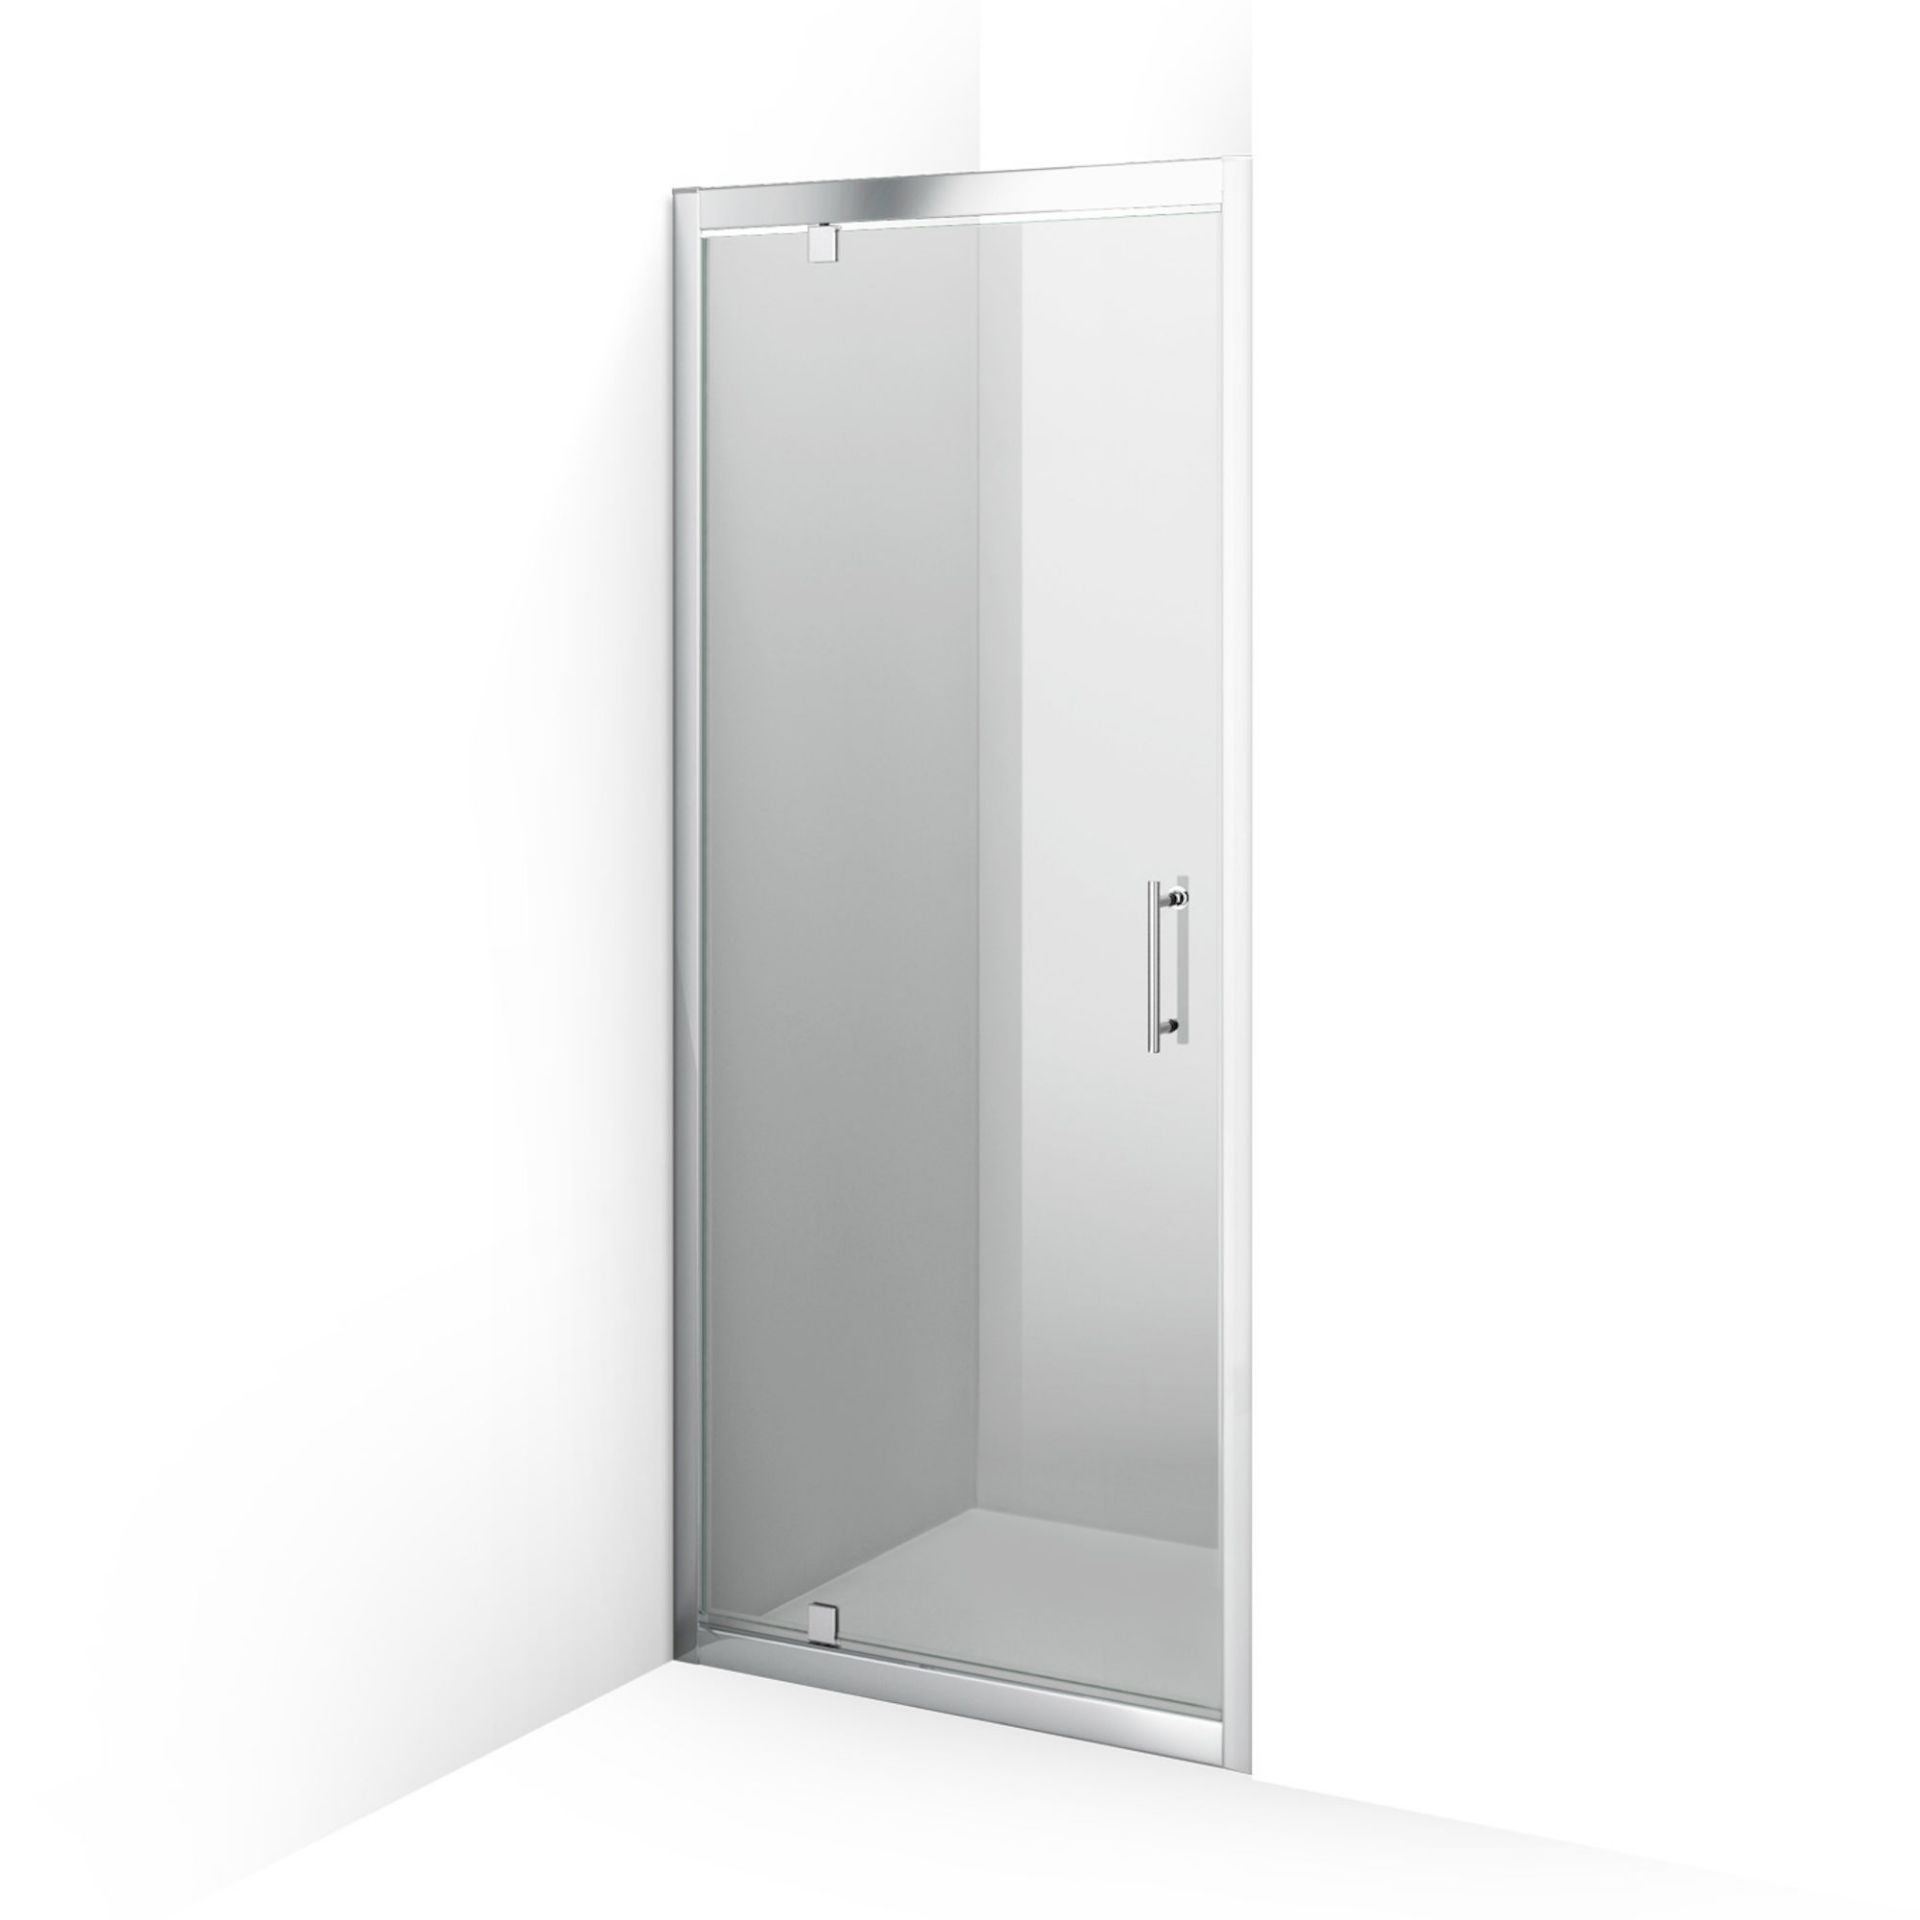 (VN106) 800mm - 6mm - Elements Pivot Shower Door. 6mm Safety Glass Fully waterproof tested - Image 4 of 4